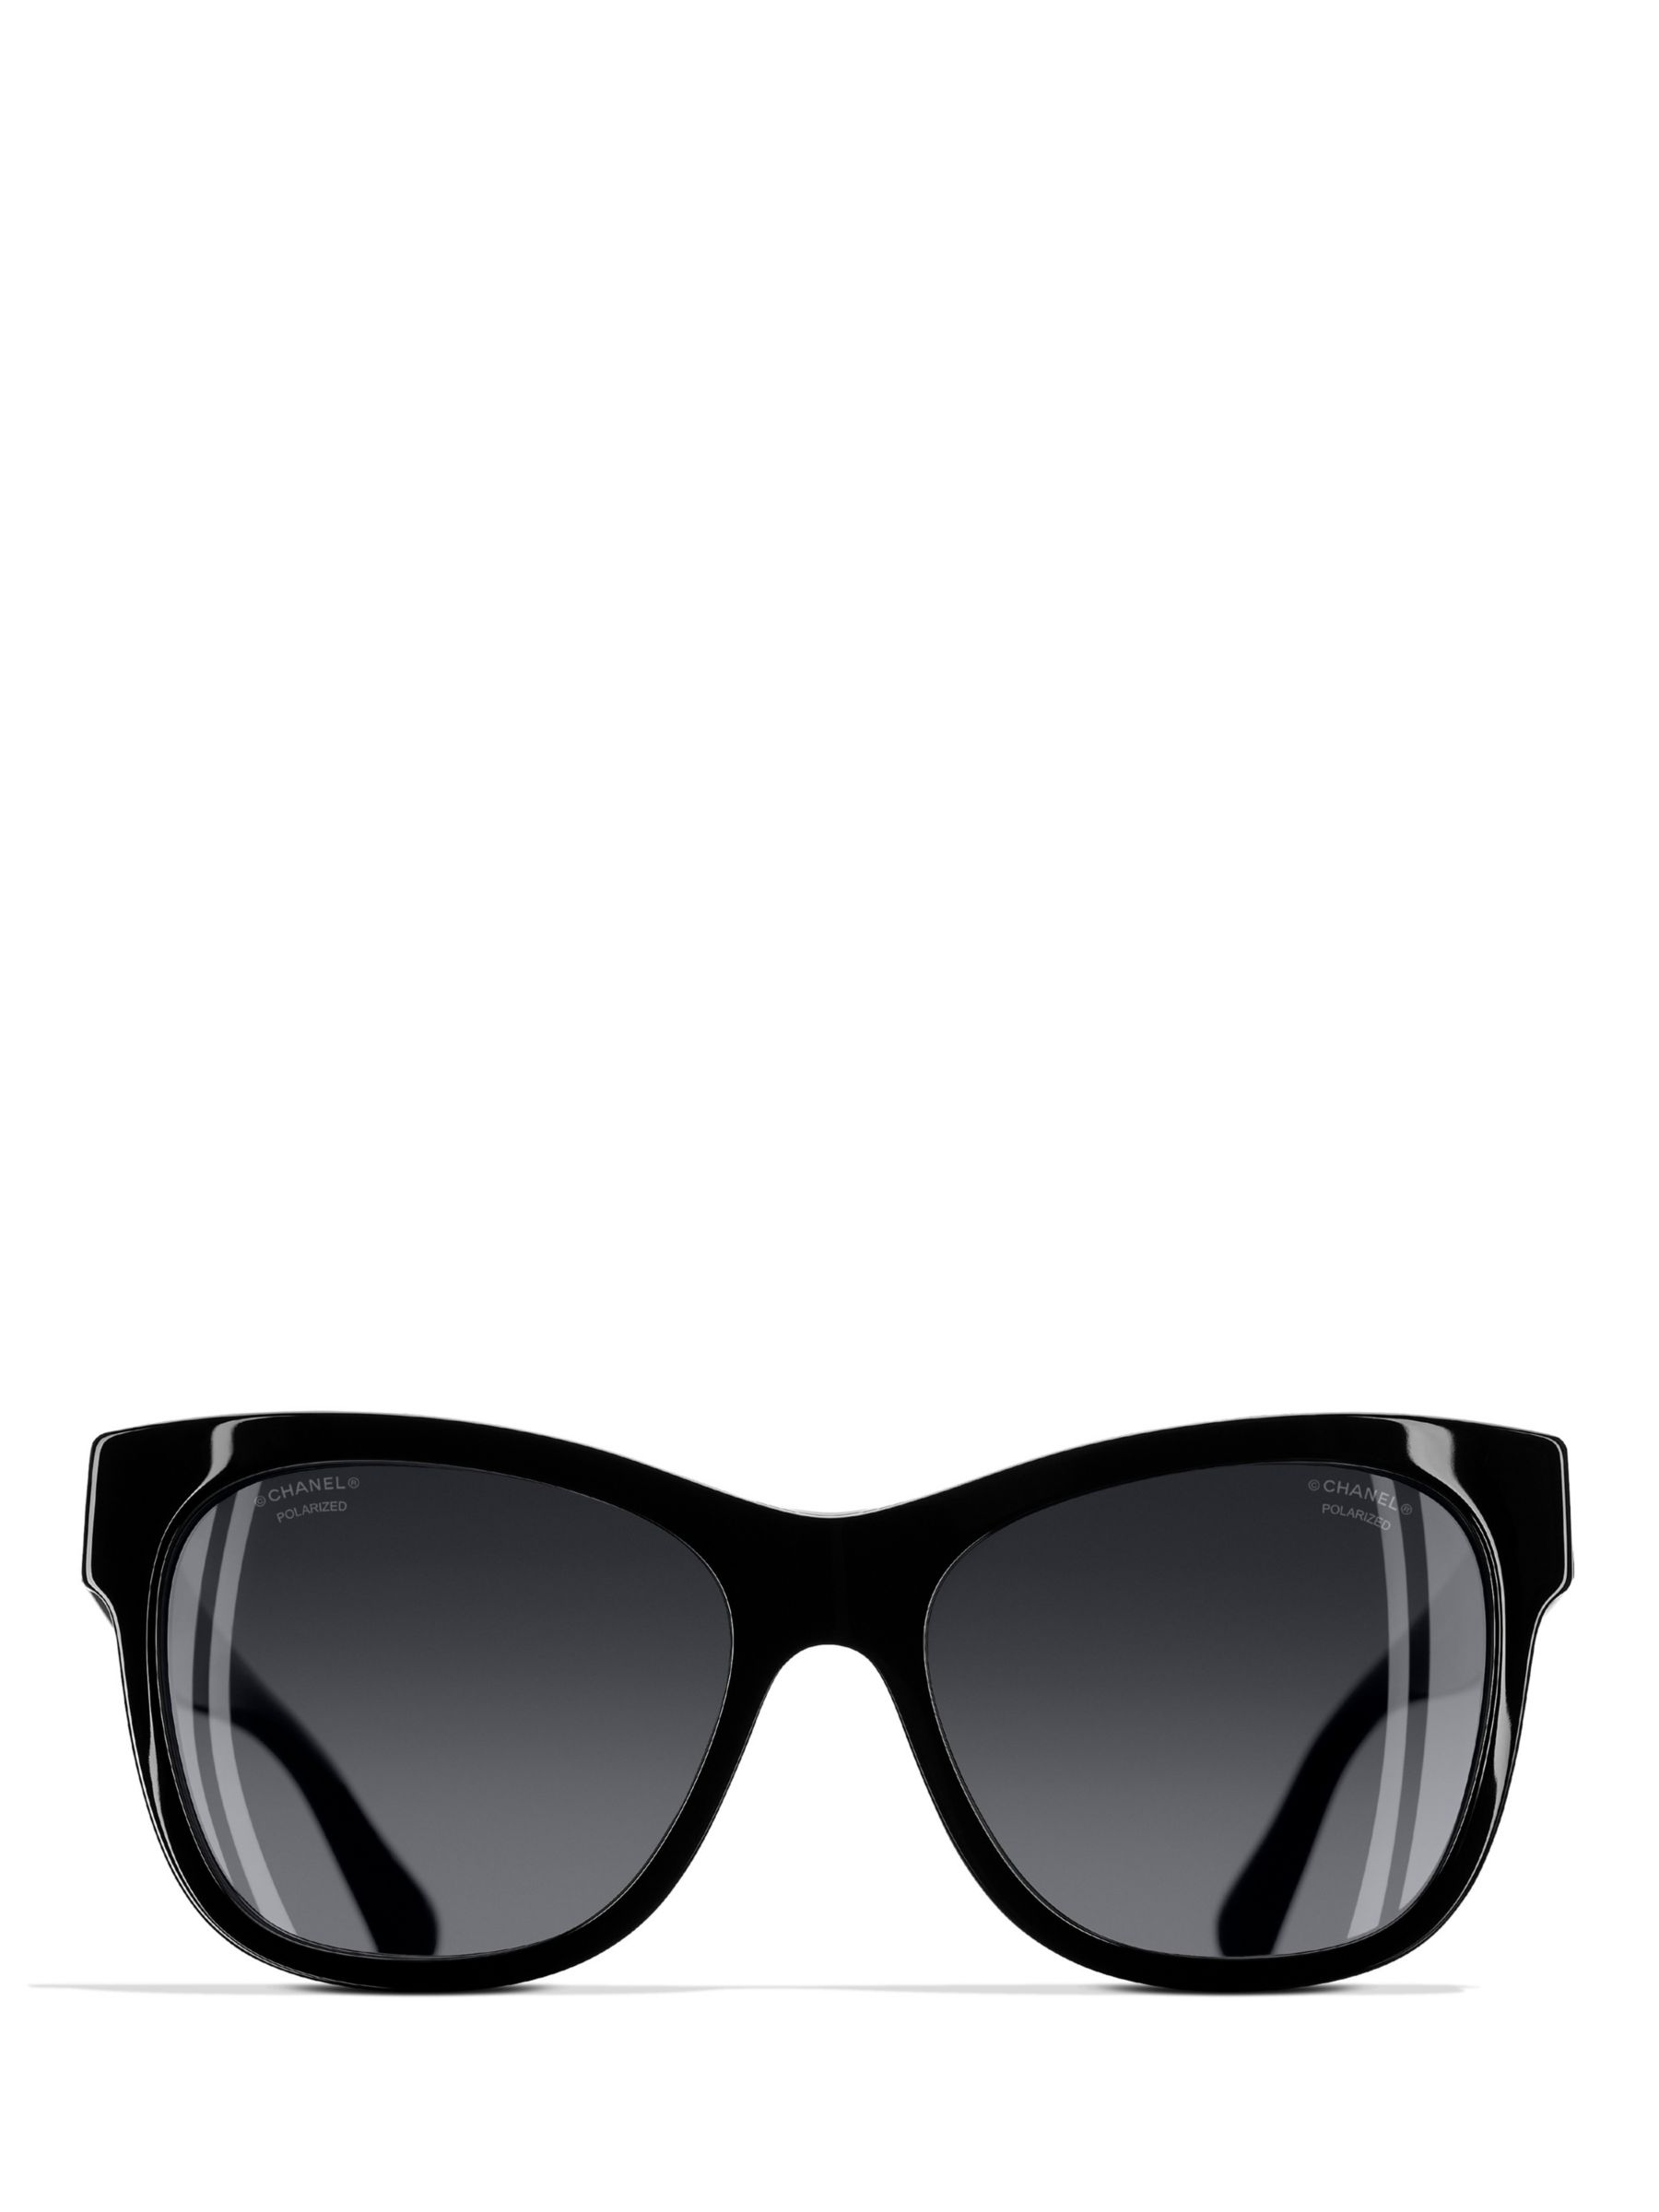 CHANEL Square Sunglasses CH5380 Black at John Lewis & Partners